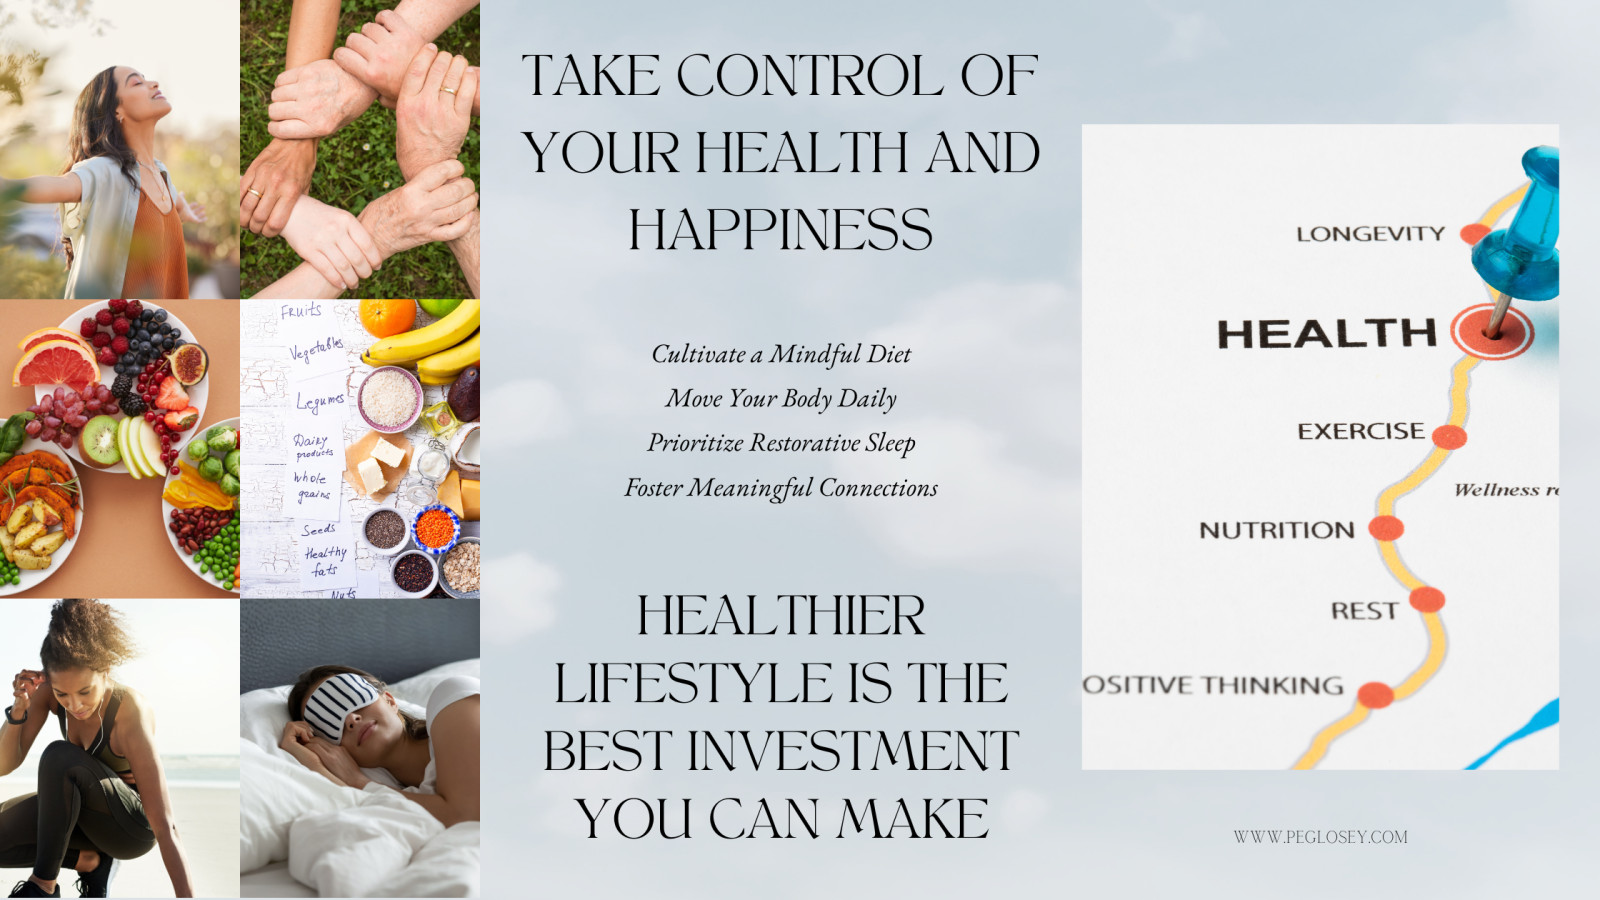 **Transform Your Life Today: The Four Essential Steps to a Healthier Lifestyle**